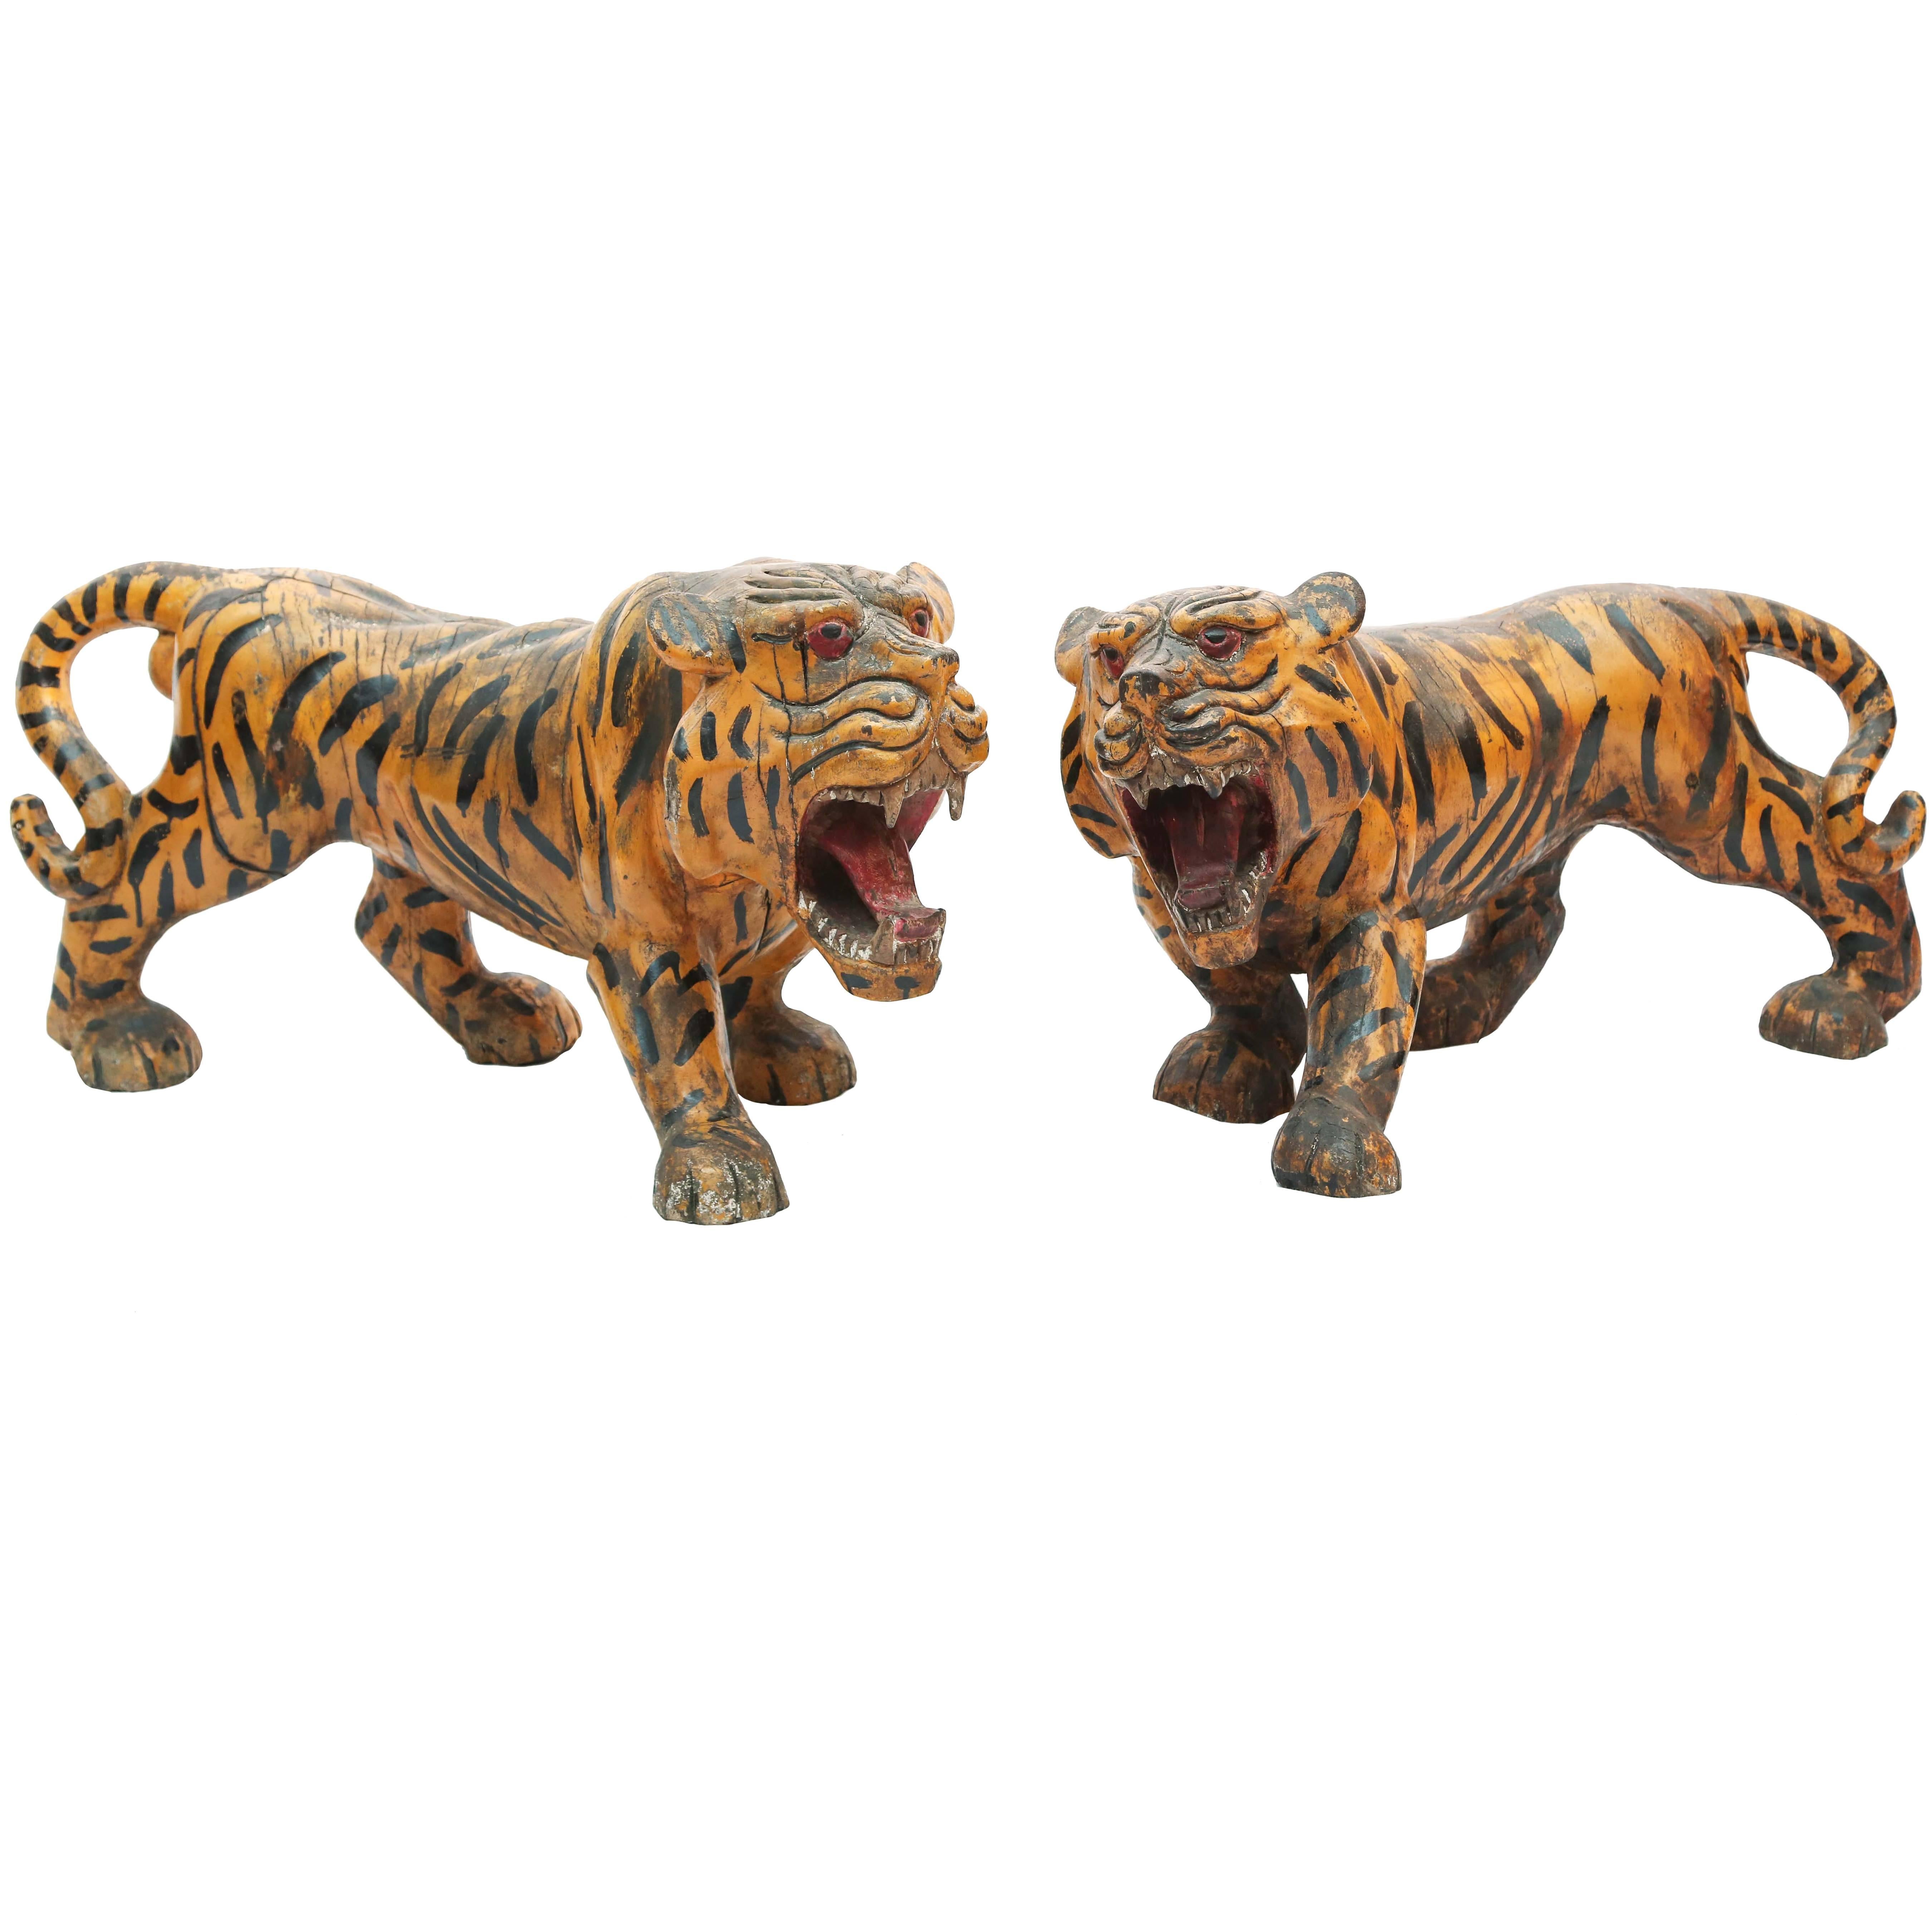 Sensational Pair of 19th Century Anglo-Indian Figure of Tigers